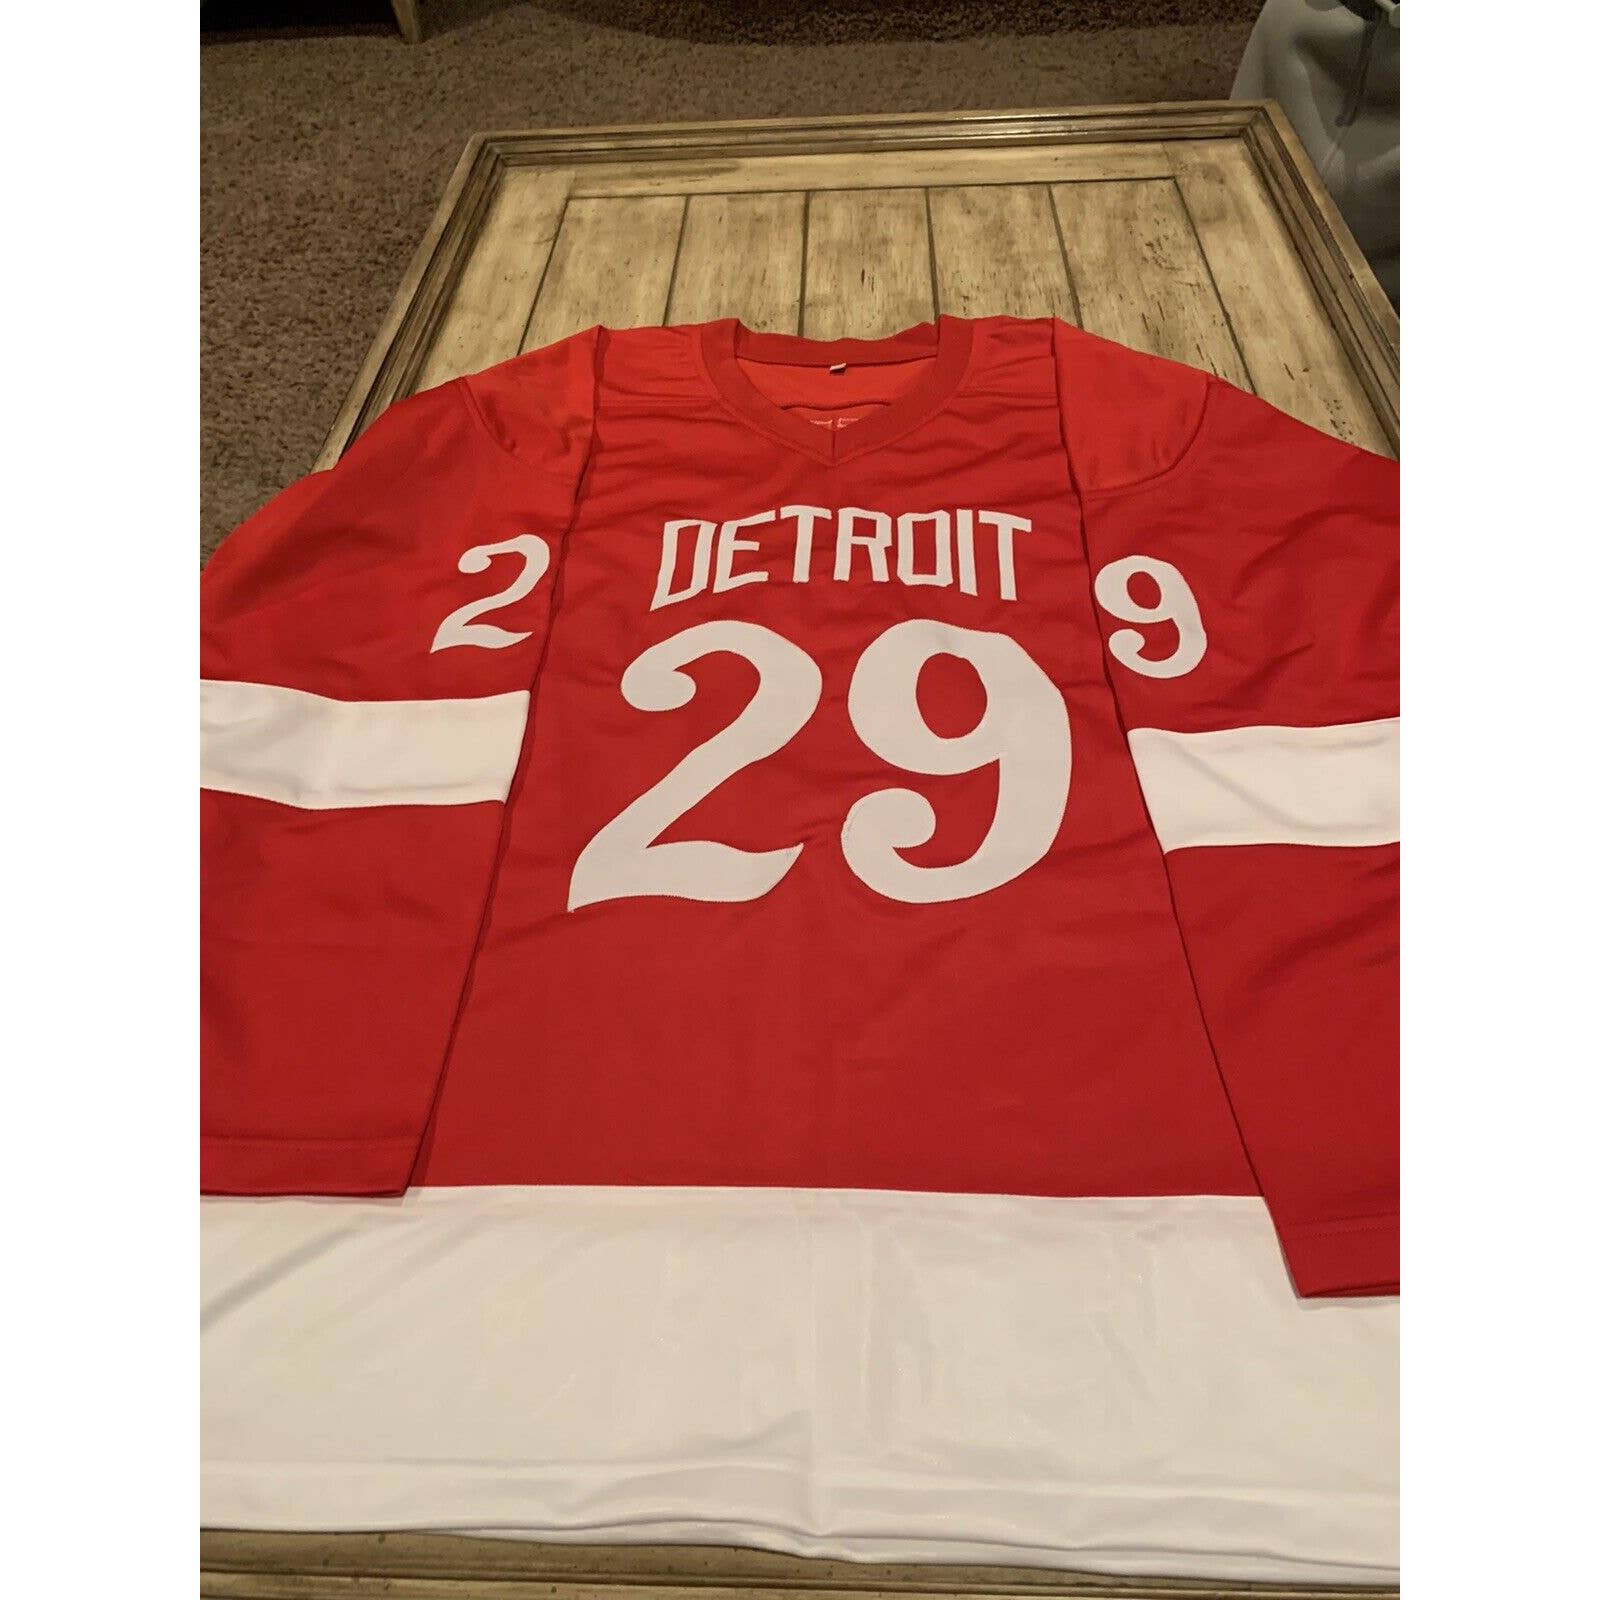 Jim Rutherford Autographed/Signed Jersey Beckett COA Detroit Red Wings - TreasuresEvolved